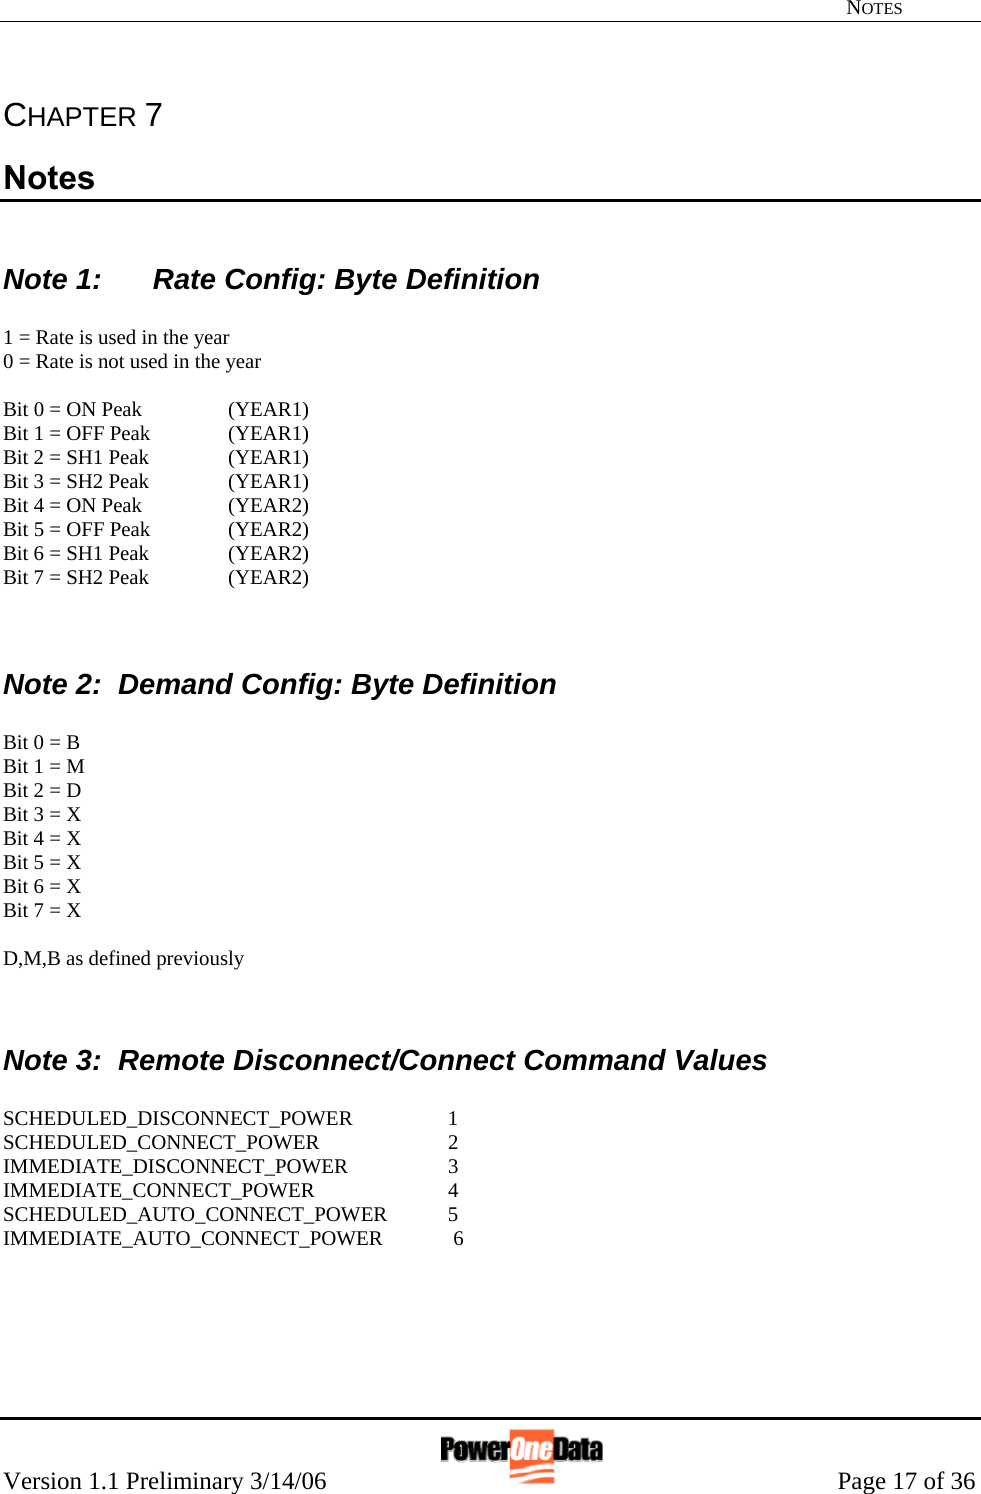   NOTES Version 1.1 Preliminary 3/14/06                                                      Page 17 of 36 CHAPTER 7 Notes  Note 1:   Rate Config: Byte Definition  1 = Rate is used in the year 0 = Rate is not used in the year  Bit 0 = ON Peak    (YEAR1) Bit 1 = OFF Peak   (YEAR1) Bit 2 = SH1 Peak   (YEAR1) Bit 3 = SH2 Peak   (YEAR1) Bit 4 = ON Peak    (YEAR2) Bit 5 = OFF Peak   (YEAR2) Bit 6 = SH1 Peak   (YEAR2) Bit 7 = SH2 Peak   (YEAR2)   Note 2:  Demand Config: Byte Definition  Bit 0 = B Bit 1 = M Bit 2 = D Bit 3 = X Bit 4 = X Bit 5 = X Bit 6 = X Bit 7 = X  D,M,B as defined previously   Note 3:  Remote Disconnect/Connect Command Values  SCHEDULED_DISCONNECT_POWER  1                                                                   SCHEDULED_CONNECT_POWER   2                                                                   IMMEDIATE_DISCONNECT_POWER  3                                                                   IMMEDIATE_CONNECT_POWER   4                                                                   SCHEDULED_AUTO_CONNECT_POWER   5                                                                   IMMEDIATE_AUTO_CONNECT_POWER   6                                                                       